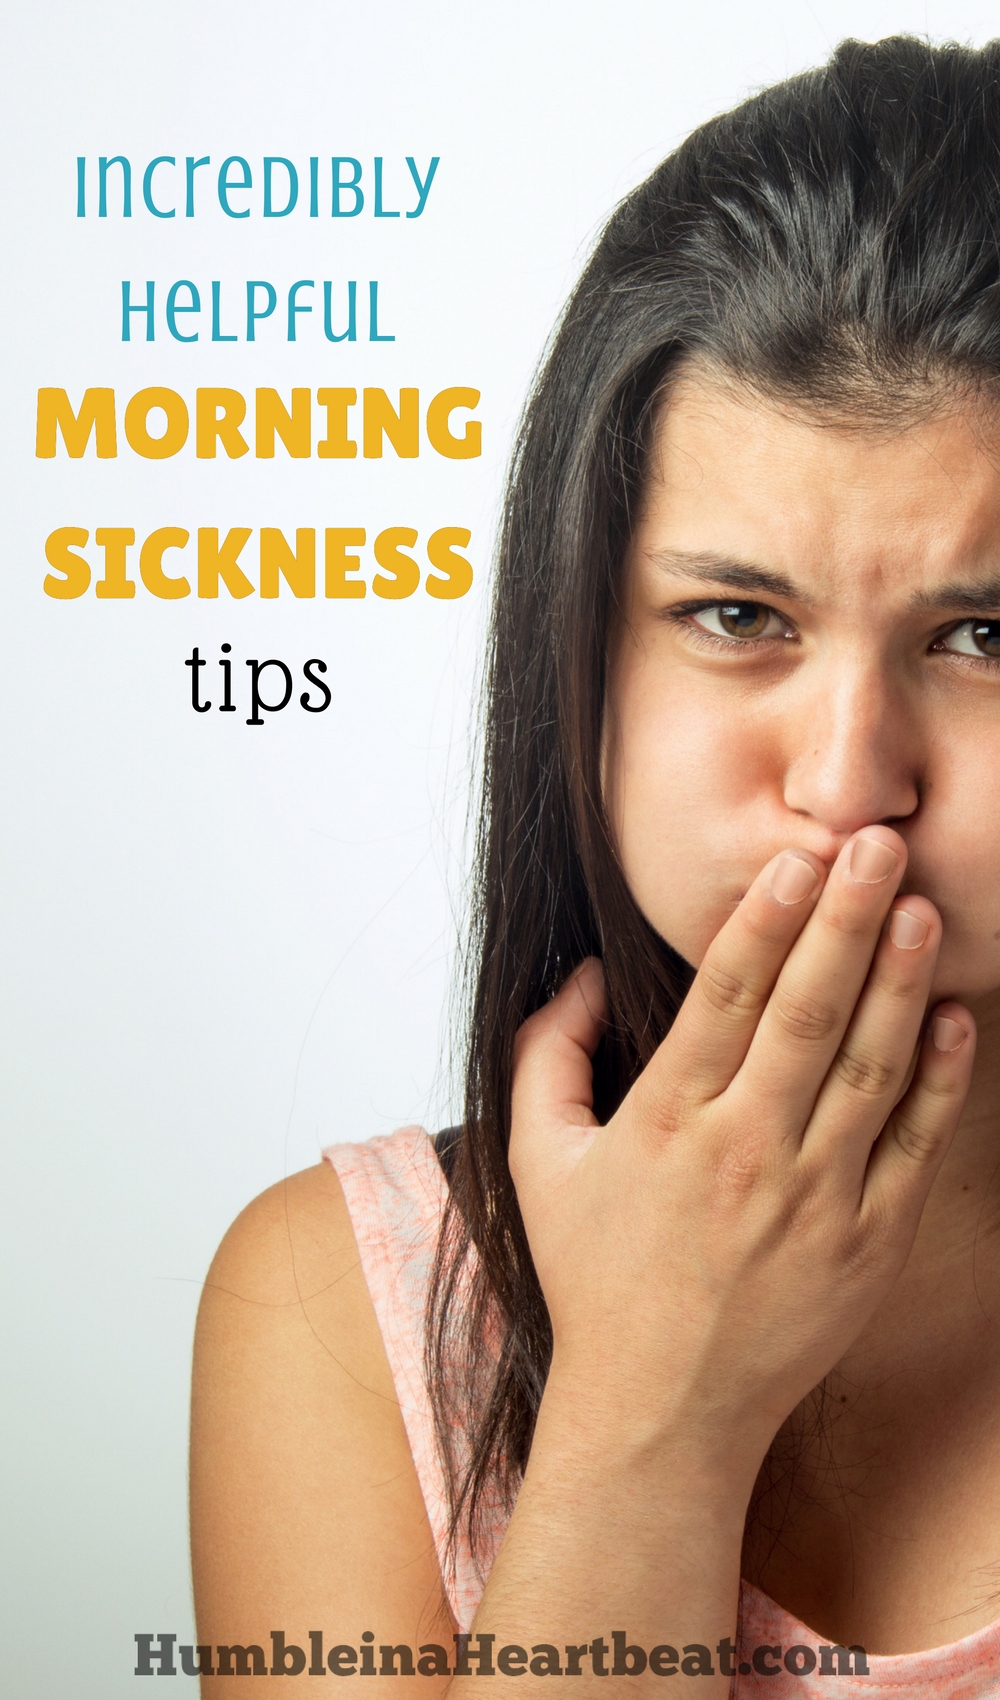 These really are great tips for morning sickness that I've never read anywhere else. It'll be really helpful when I get pregnant again!